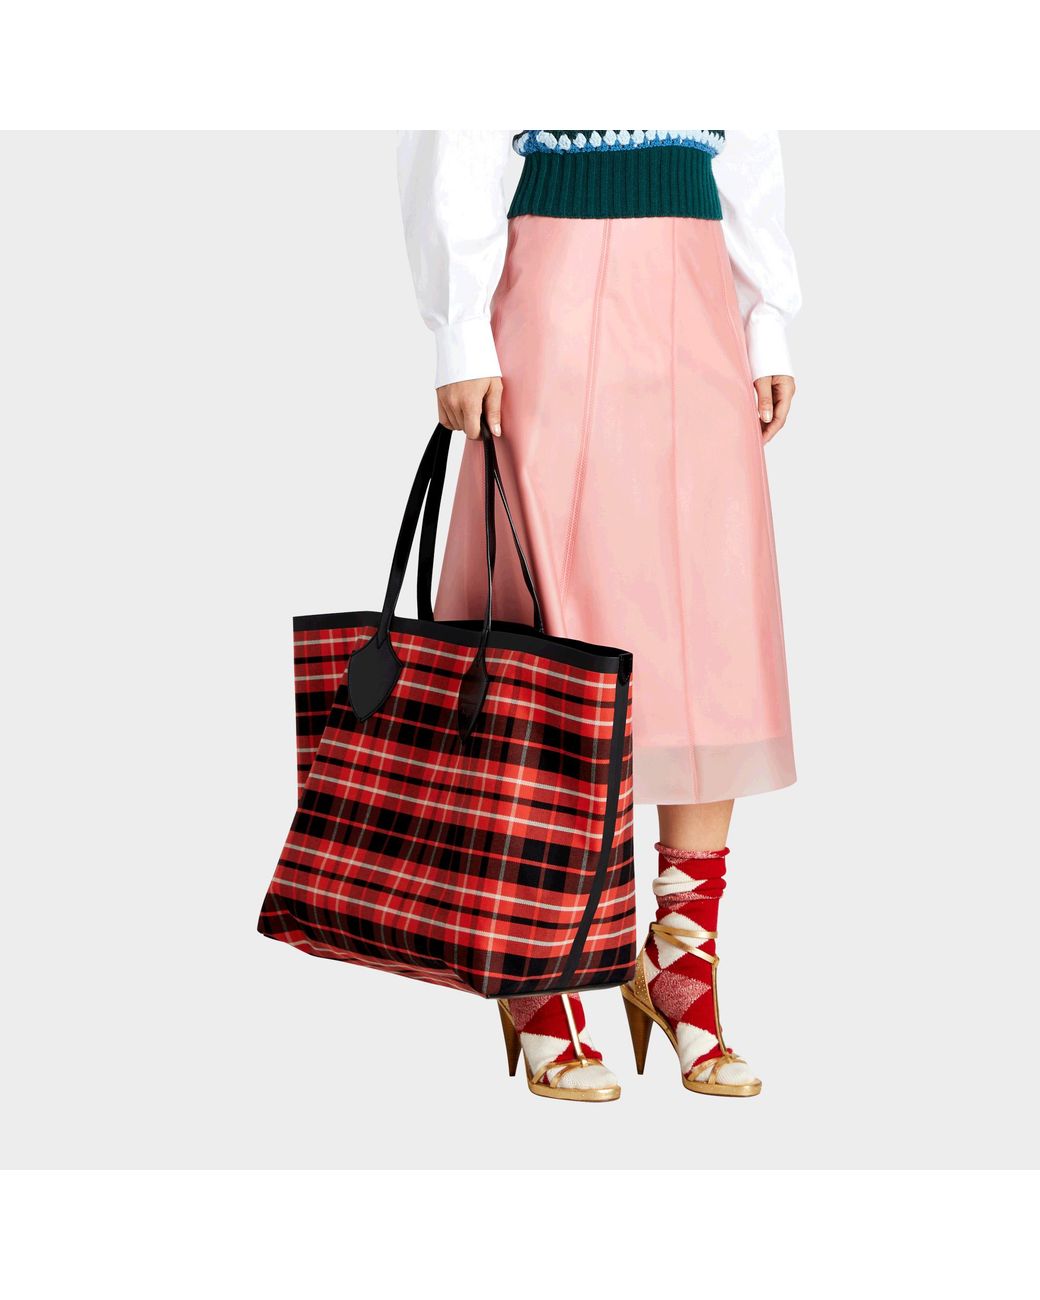 Burberry The Giant Reversible Tote Bag In Vibrant Red And Black Tartan  Bonded | Lyst